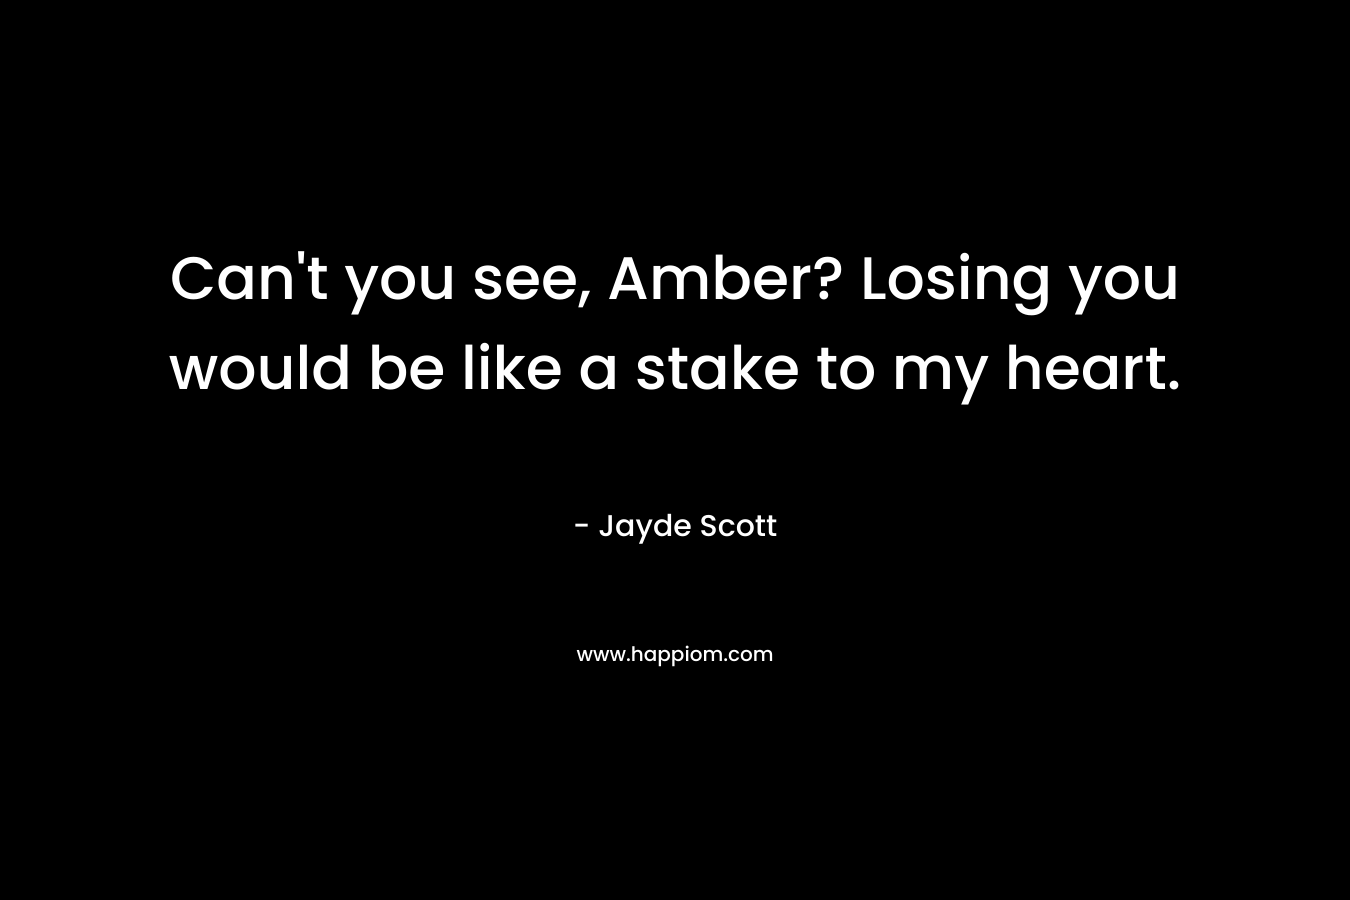 Can't you see, Amber? Losing you would be like a stake to my heart.